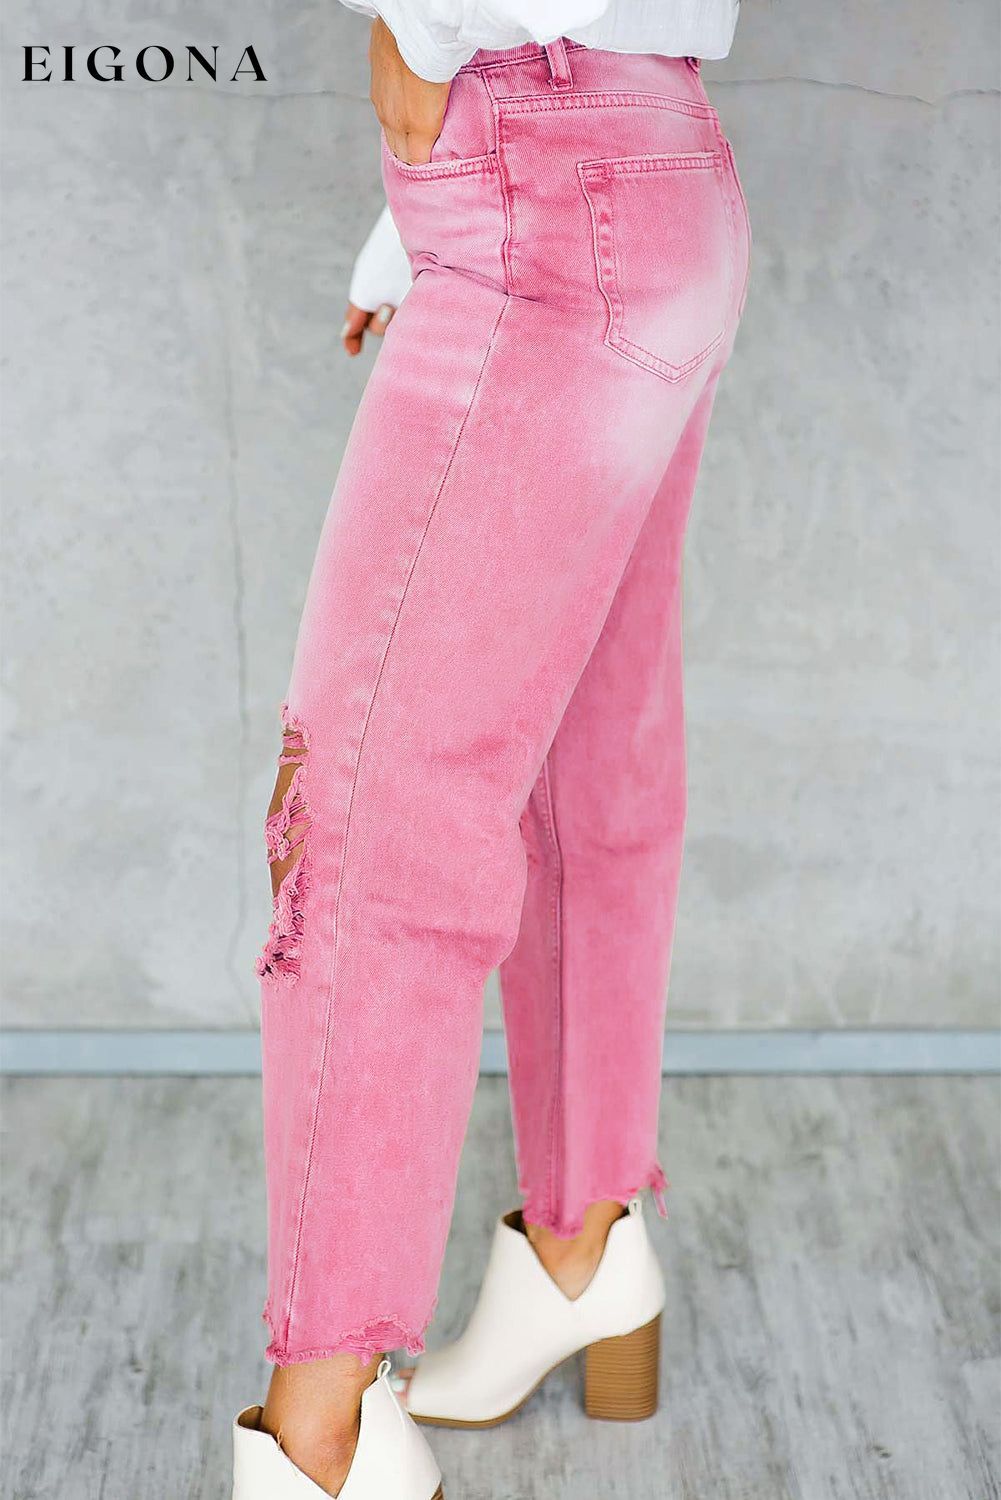 Peach Blossom Distressed Hollow-out High Waist Cropped Flare Jeans All In Stock Best Sellers bottoms clothes Color Pink Craft Distressed Craft Washed EDM Monthly Recomend Fabric Denim Jeans Occasion Daily Print Solid Color Season Spring Silhouette Wide Leg Style Southern Belle Women's Bottoms